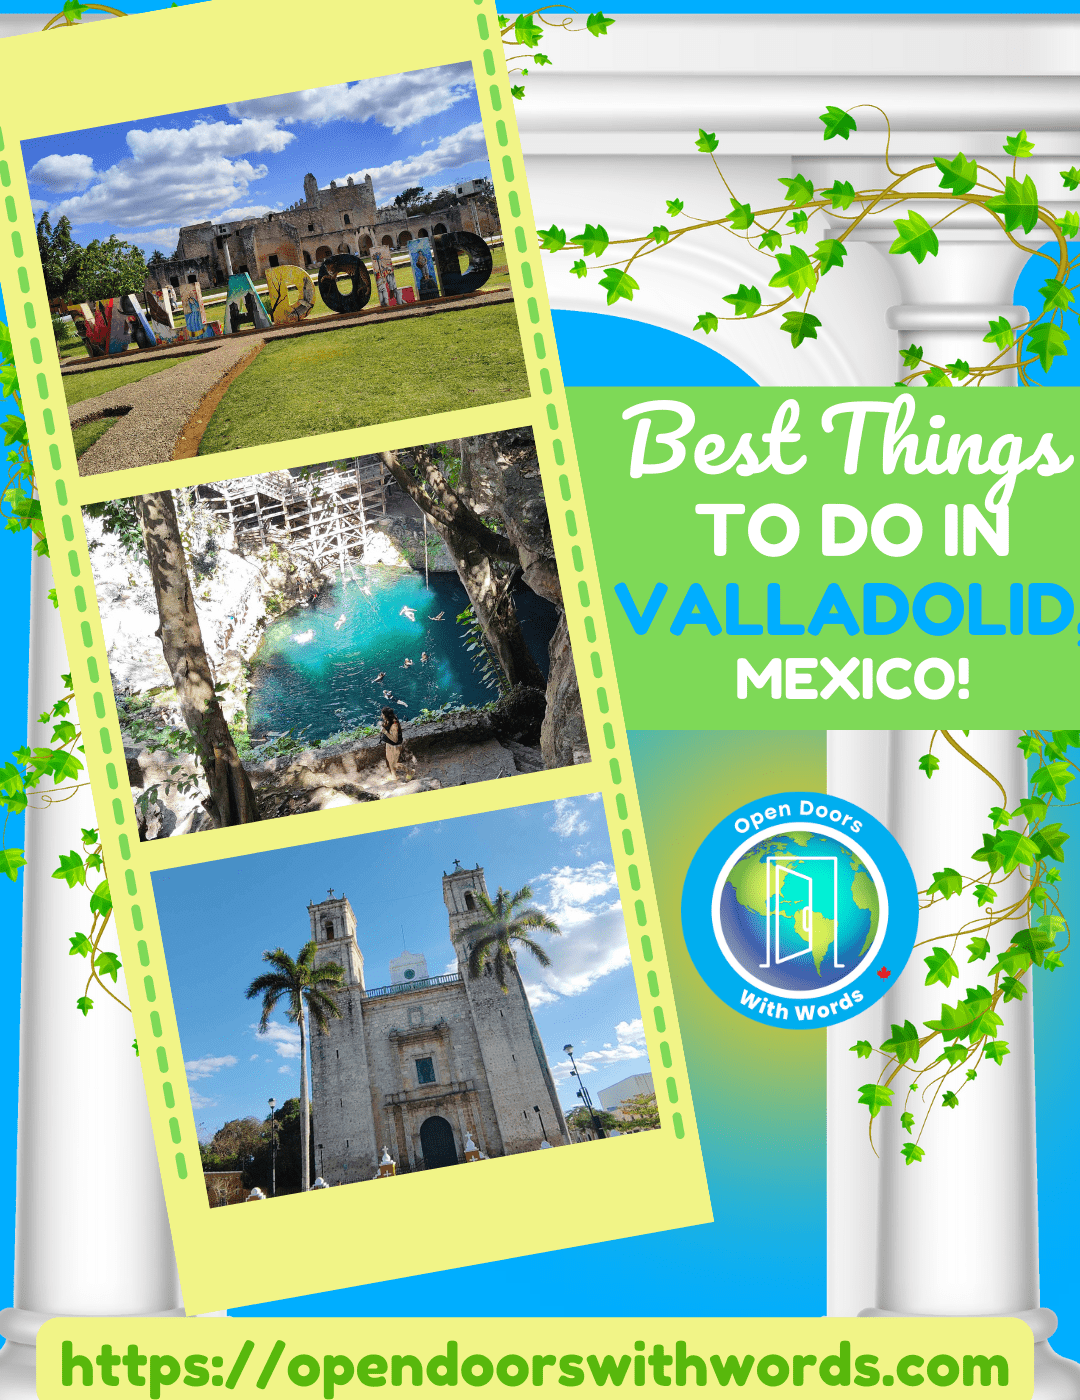 Best Things to do in Valladolid, Mexico